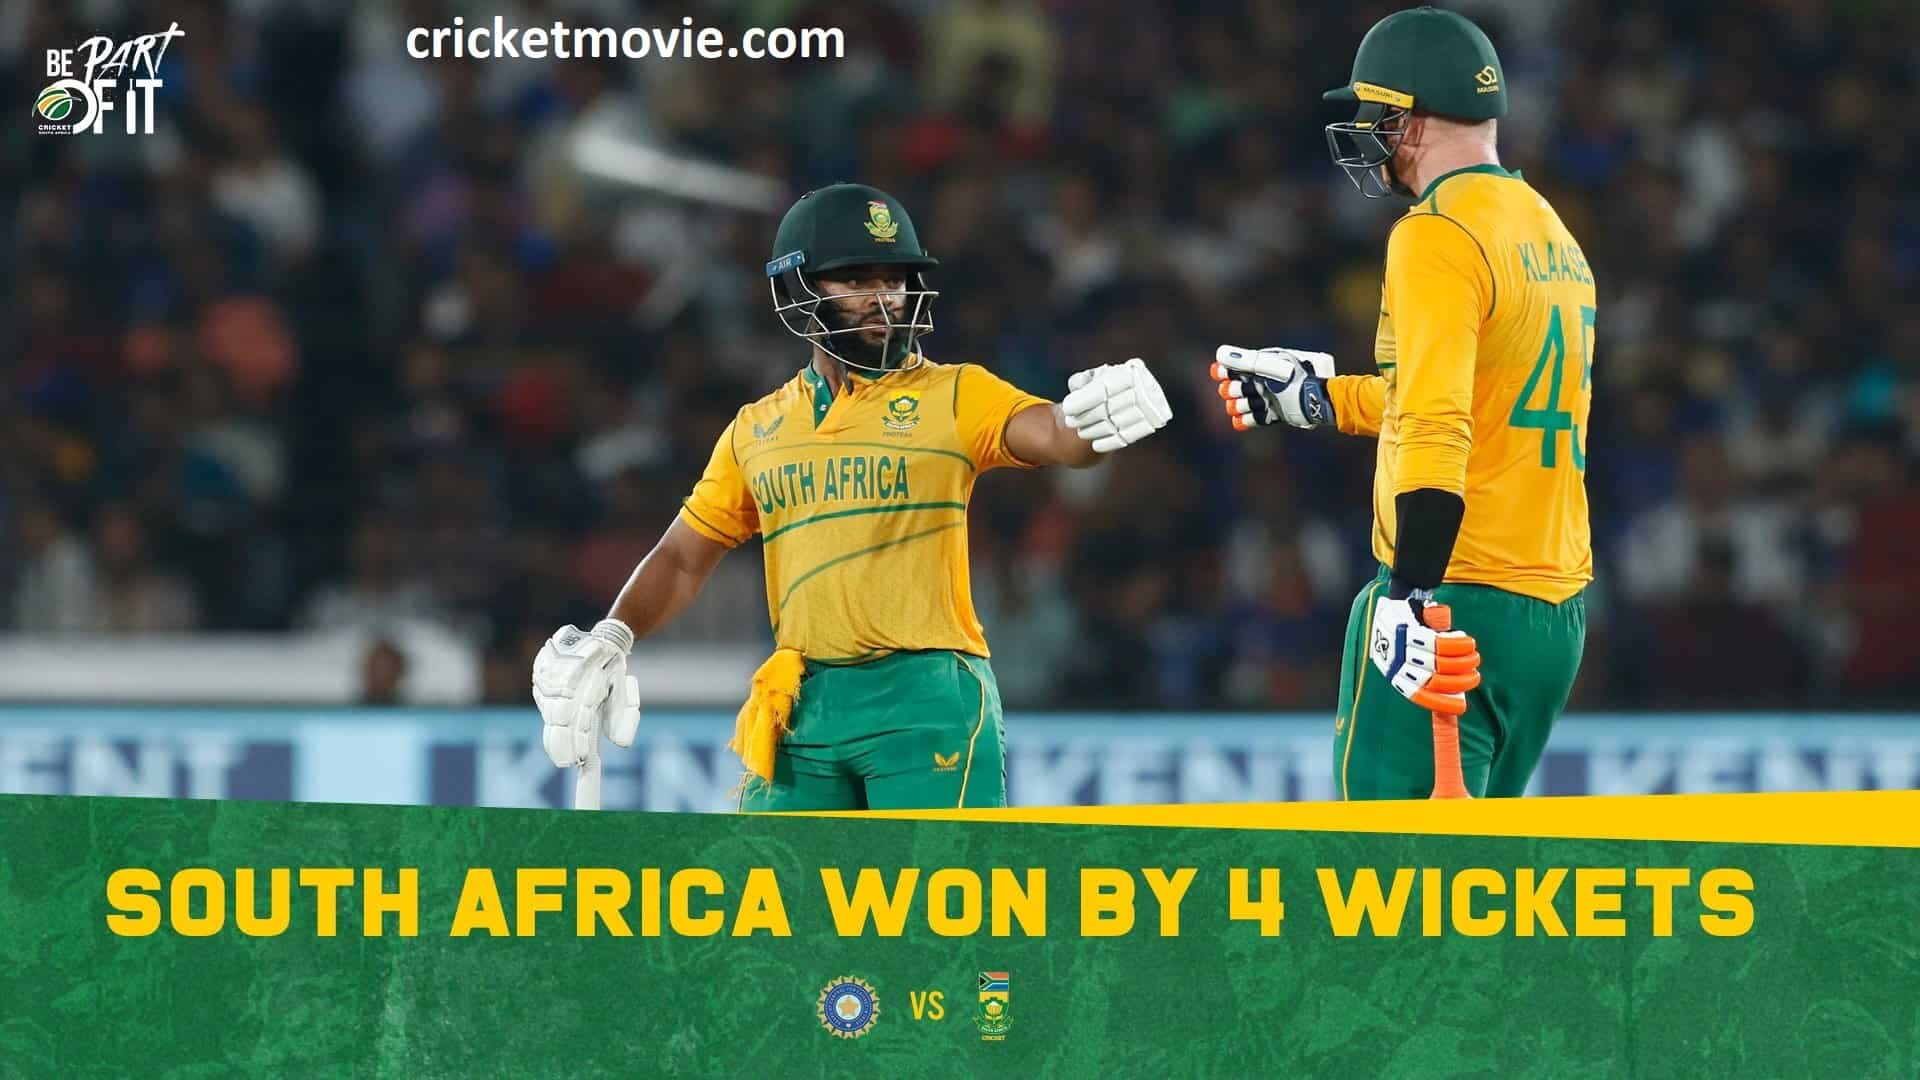 Back to back defeats for Team India against South Africa-cricketmovie.com